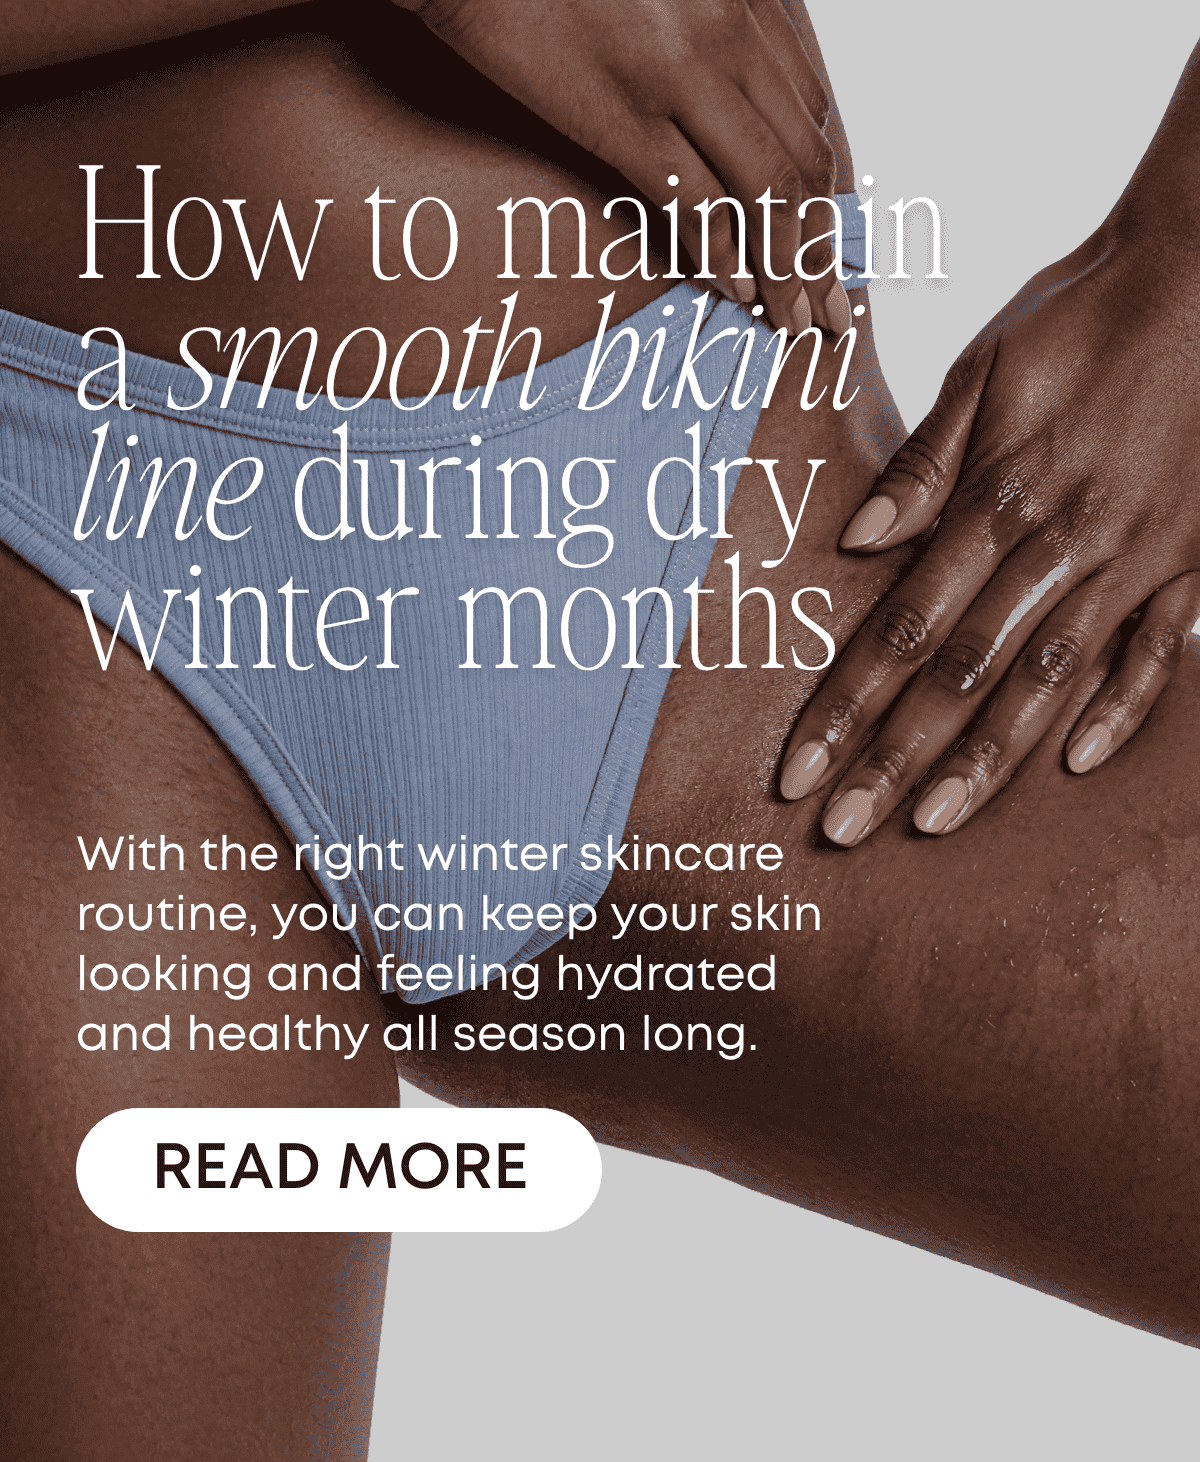 How to maintain a smooth bikini line during dry winter months.